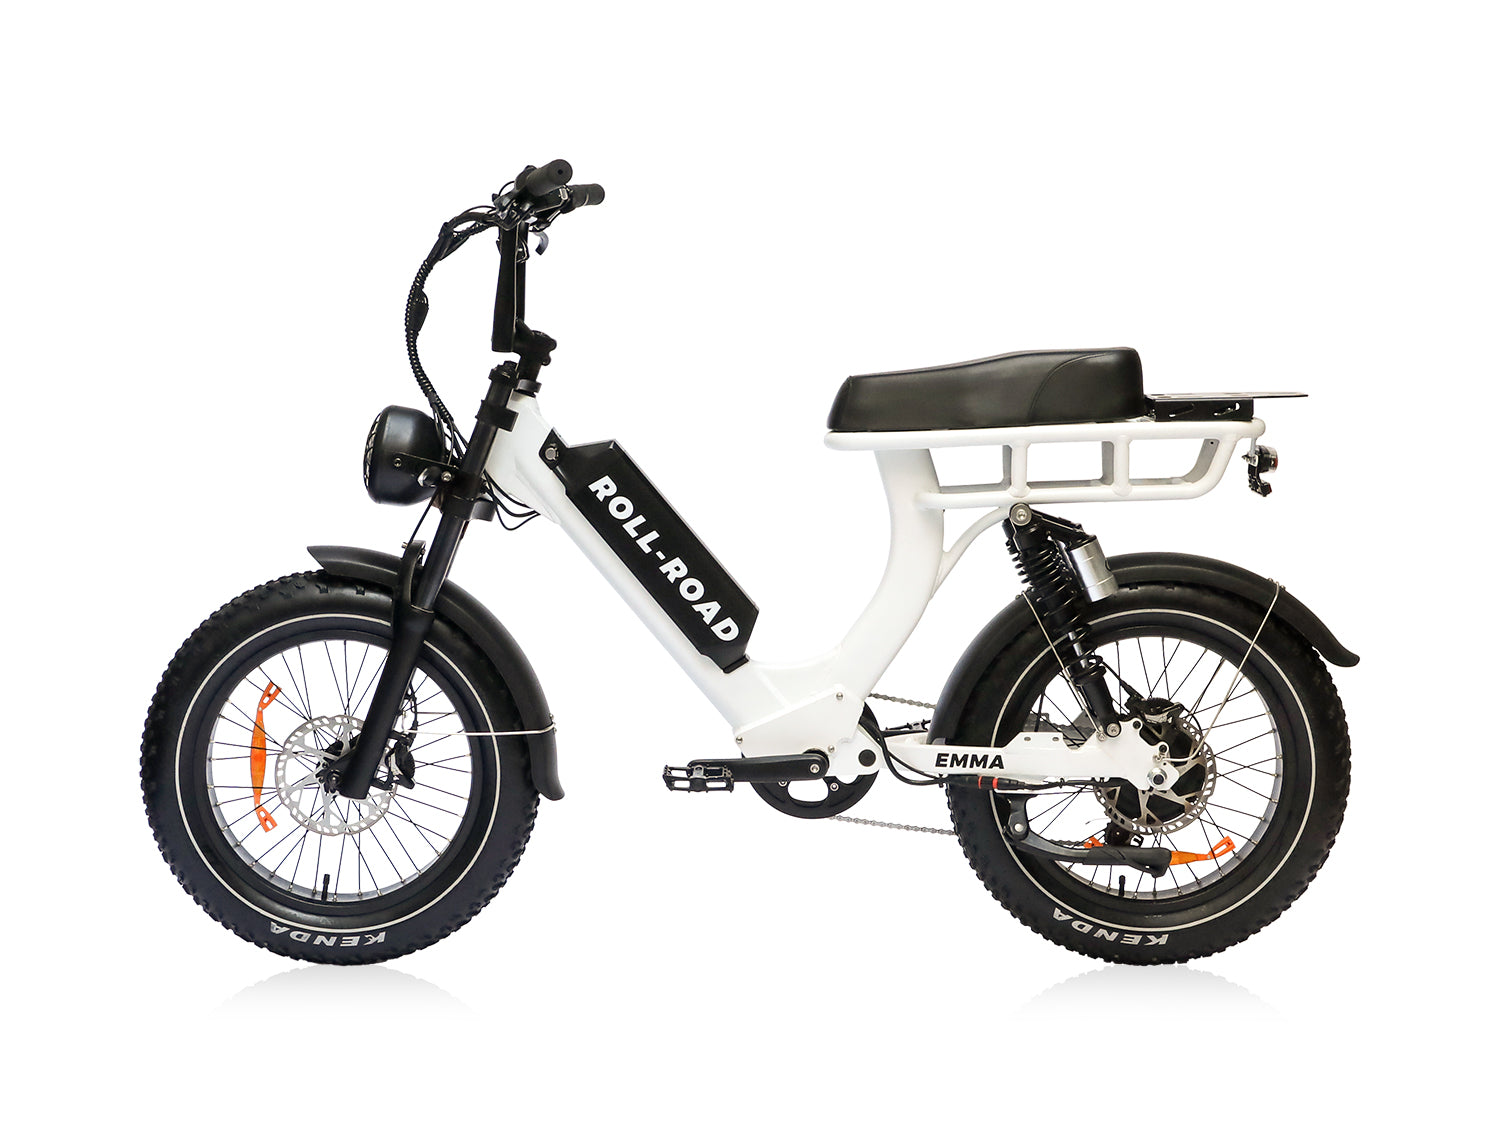 EMMA Long Range |Moped-style Ebike for Adults|400LB Heavy Rider|Step Through Electric Bike 3